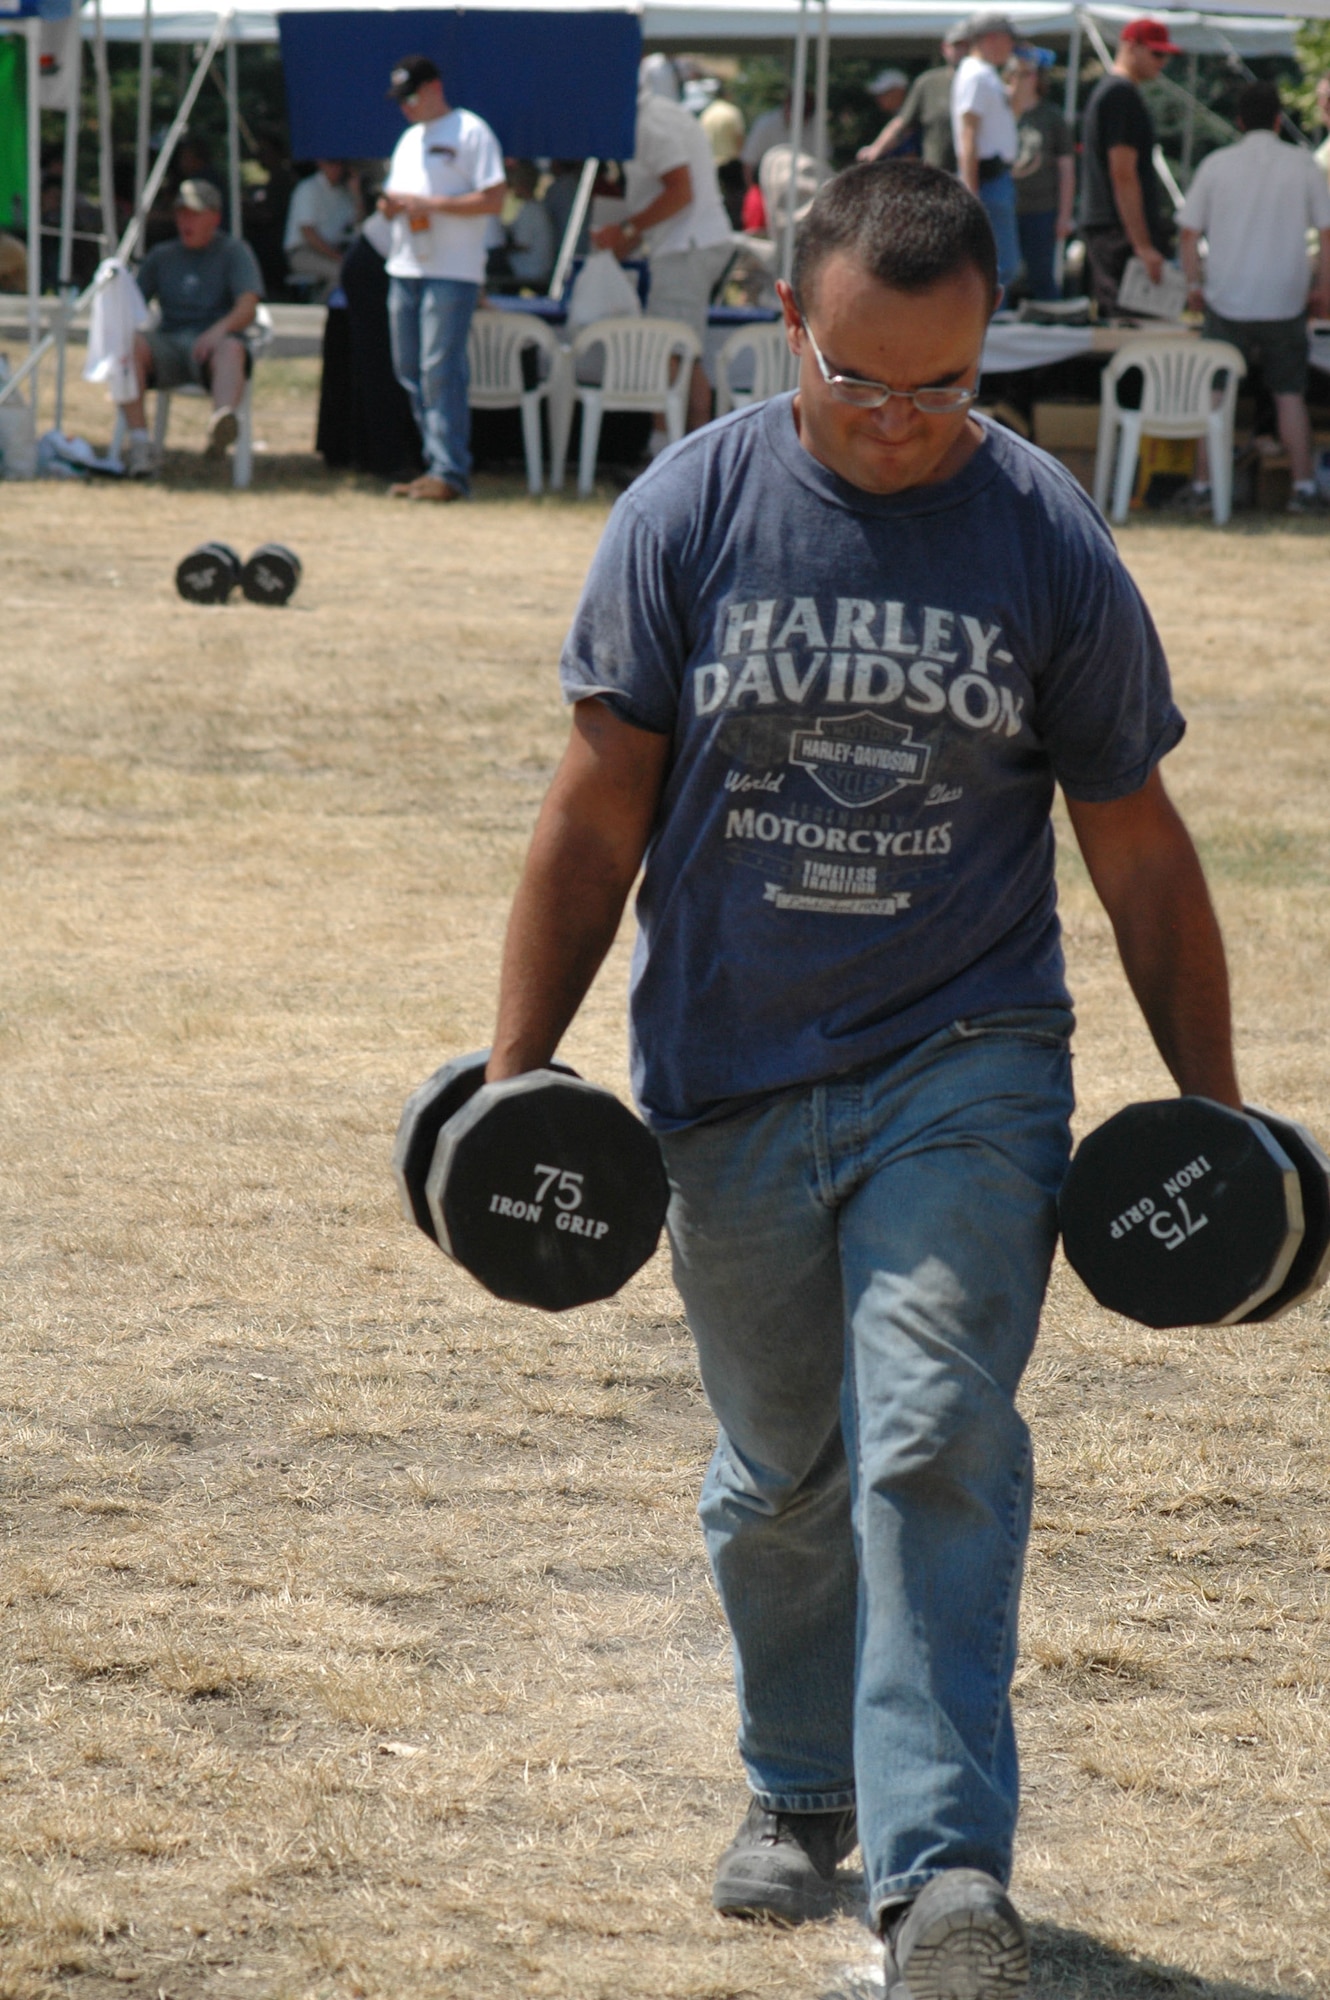 Senior Airman Pillip Amsden, 819th RED HORSE Squadron heavy equipment operator, carries two 75 pound weights in the Farmer's Walk event during the Grizzly Challenge Competition. The"Cruisin' the Summer" base picnic took place July 27, and more than 2,500 people attended the free, annual barbeque at Malmstrom Air Force Base, Mont. (U.S. Air Force photo/Airman 1st Class Dillon White).